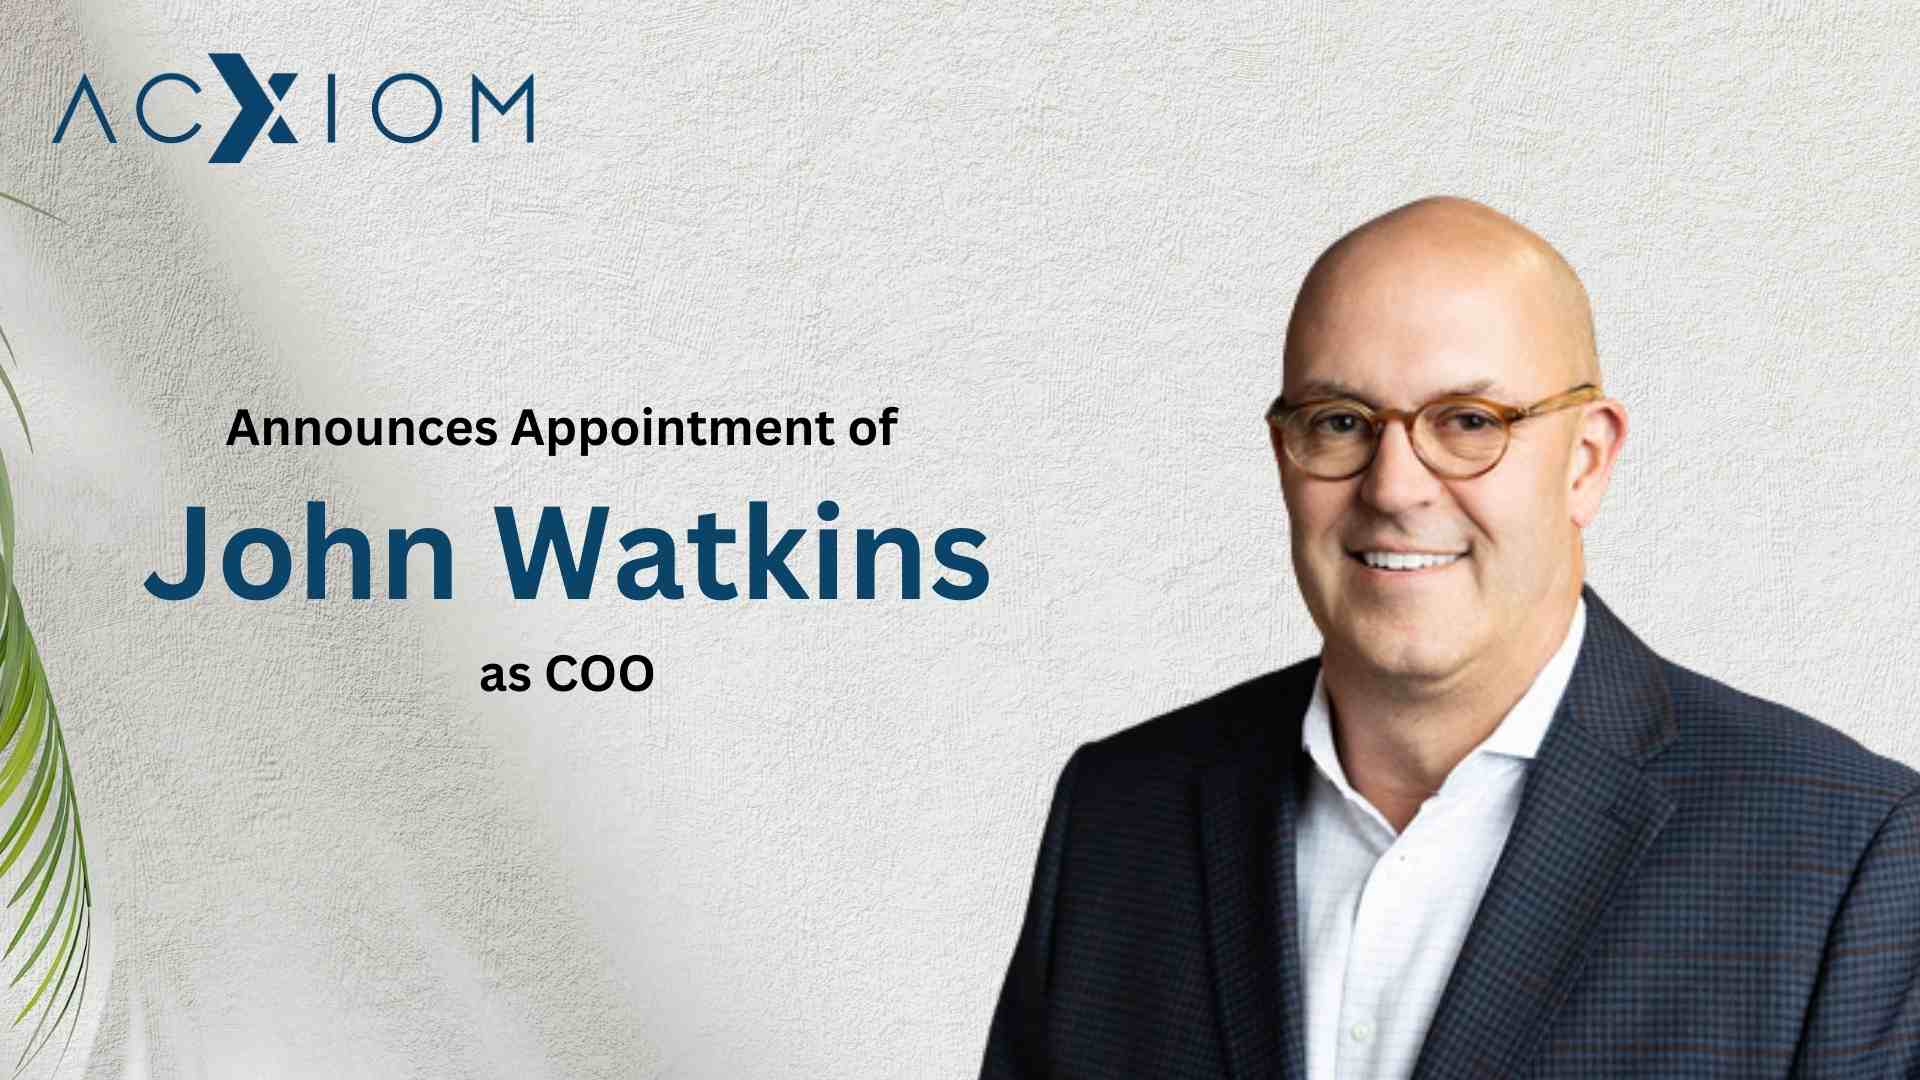 Acxiom Appoints John Watkins as COO to Drive New Era of Operational Excellence